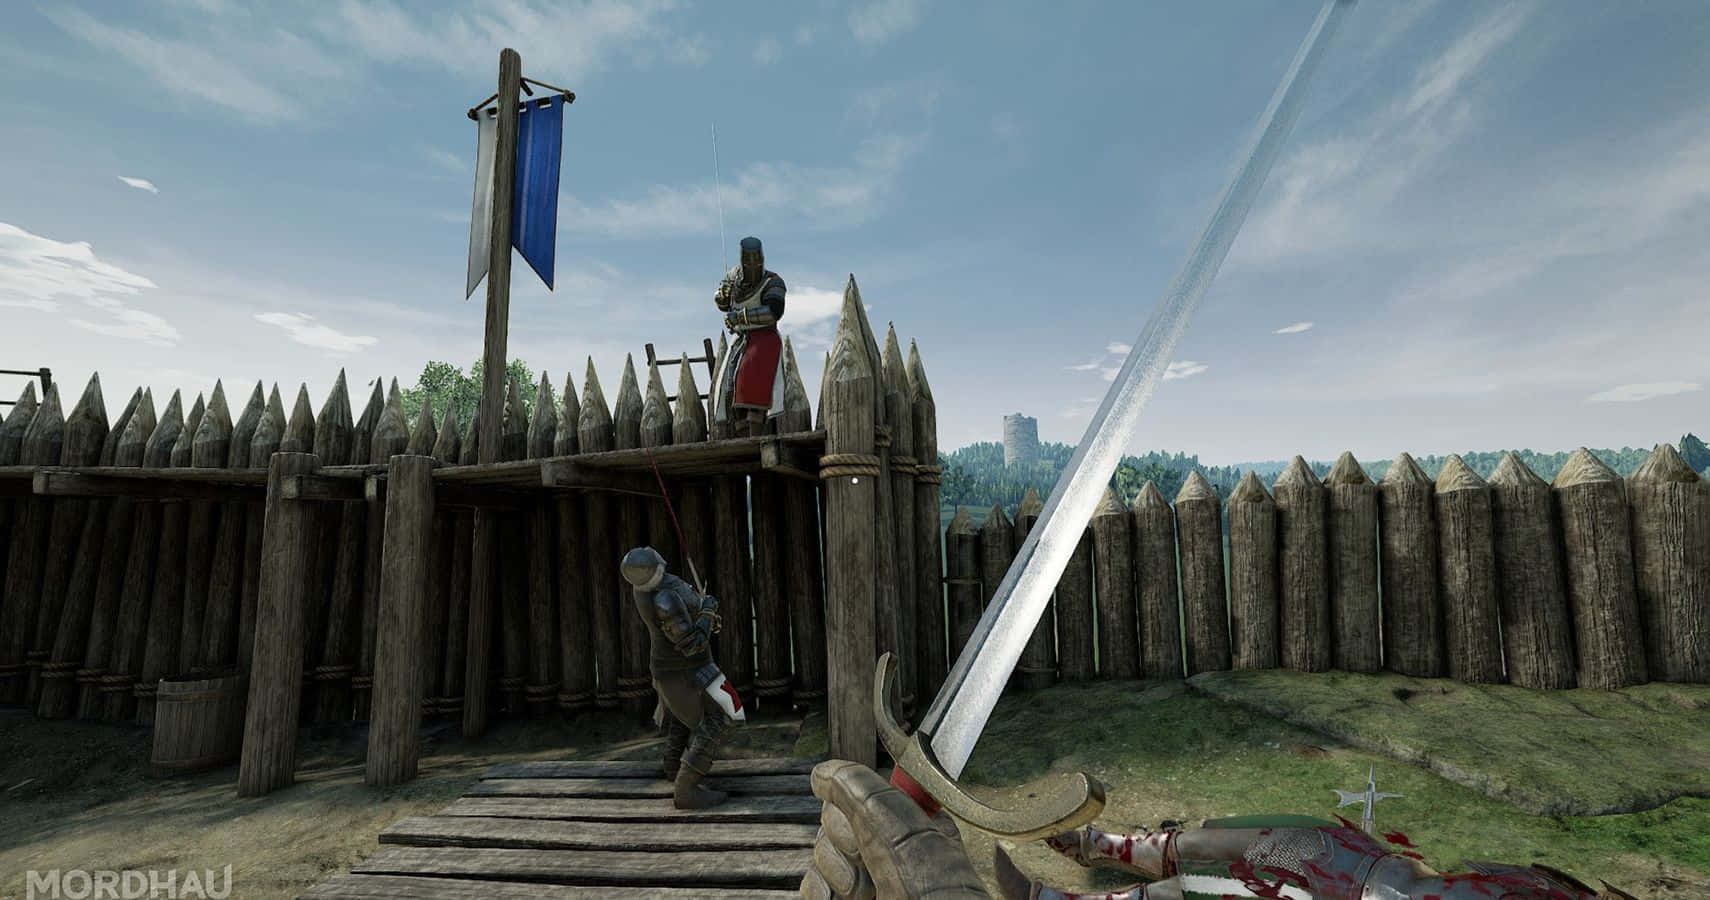 "Stand Your Ground in Mordhau"